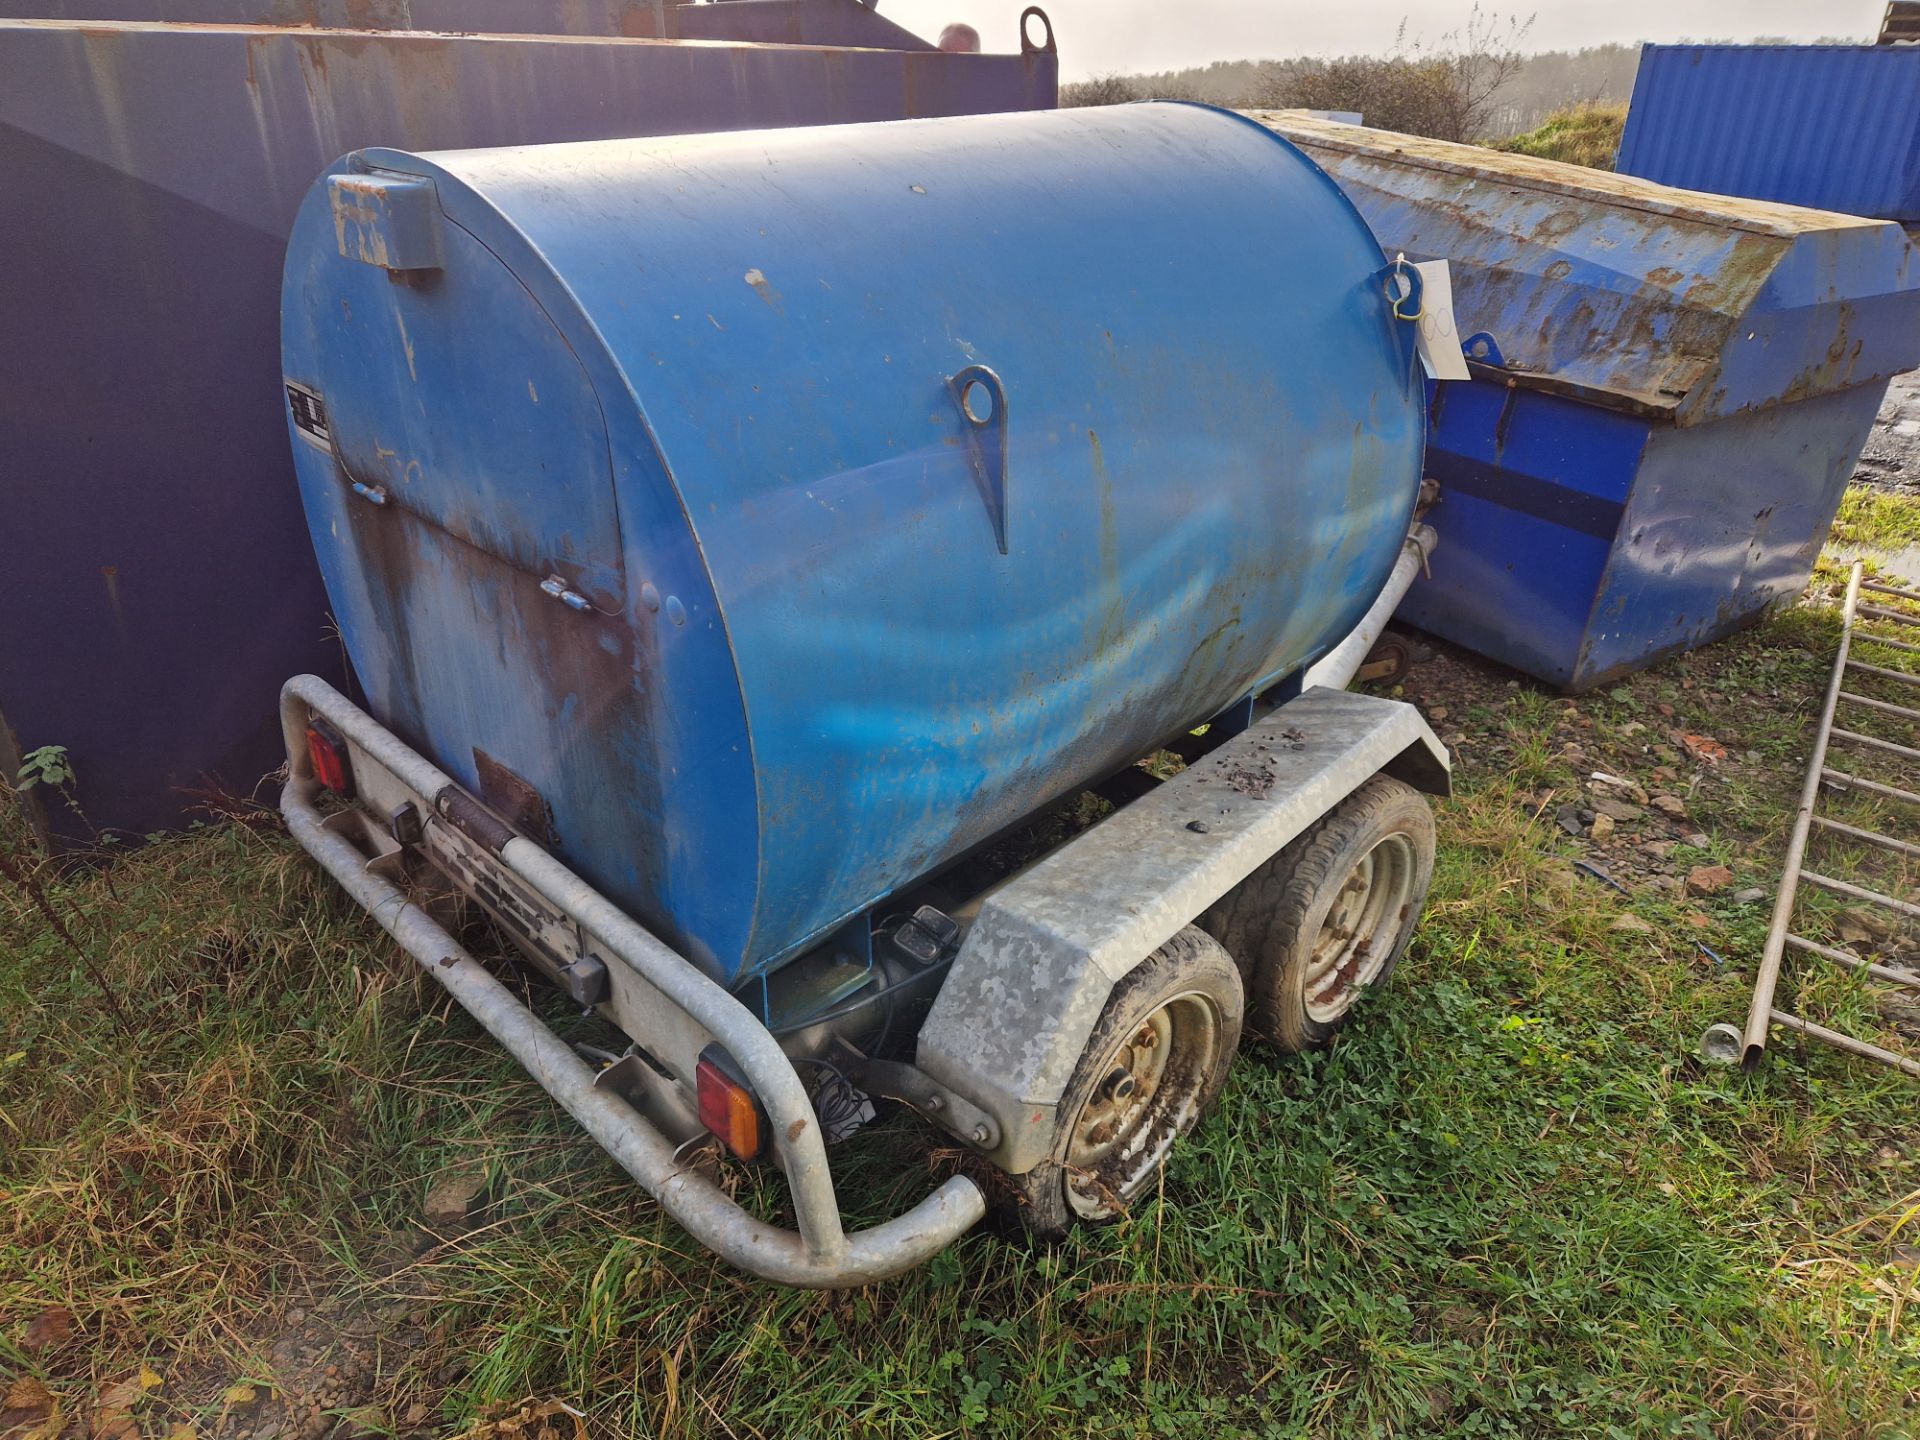 Fuel Proof 1000L Twin Axle Bowser Trailer, YoM 2009, Serial No. 7356 Please read the following - Image 2 of 5